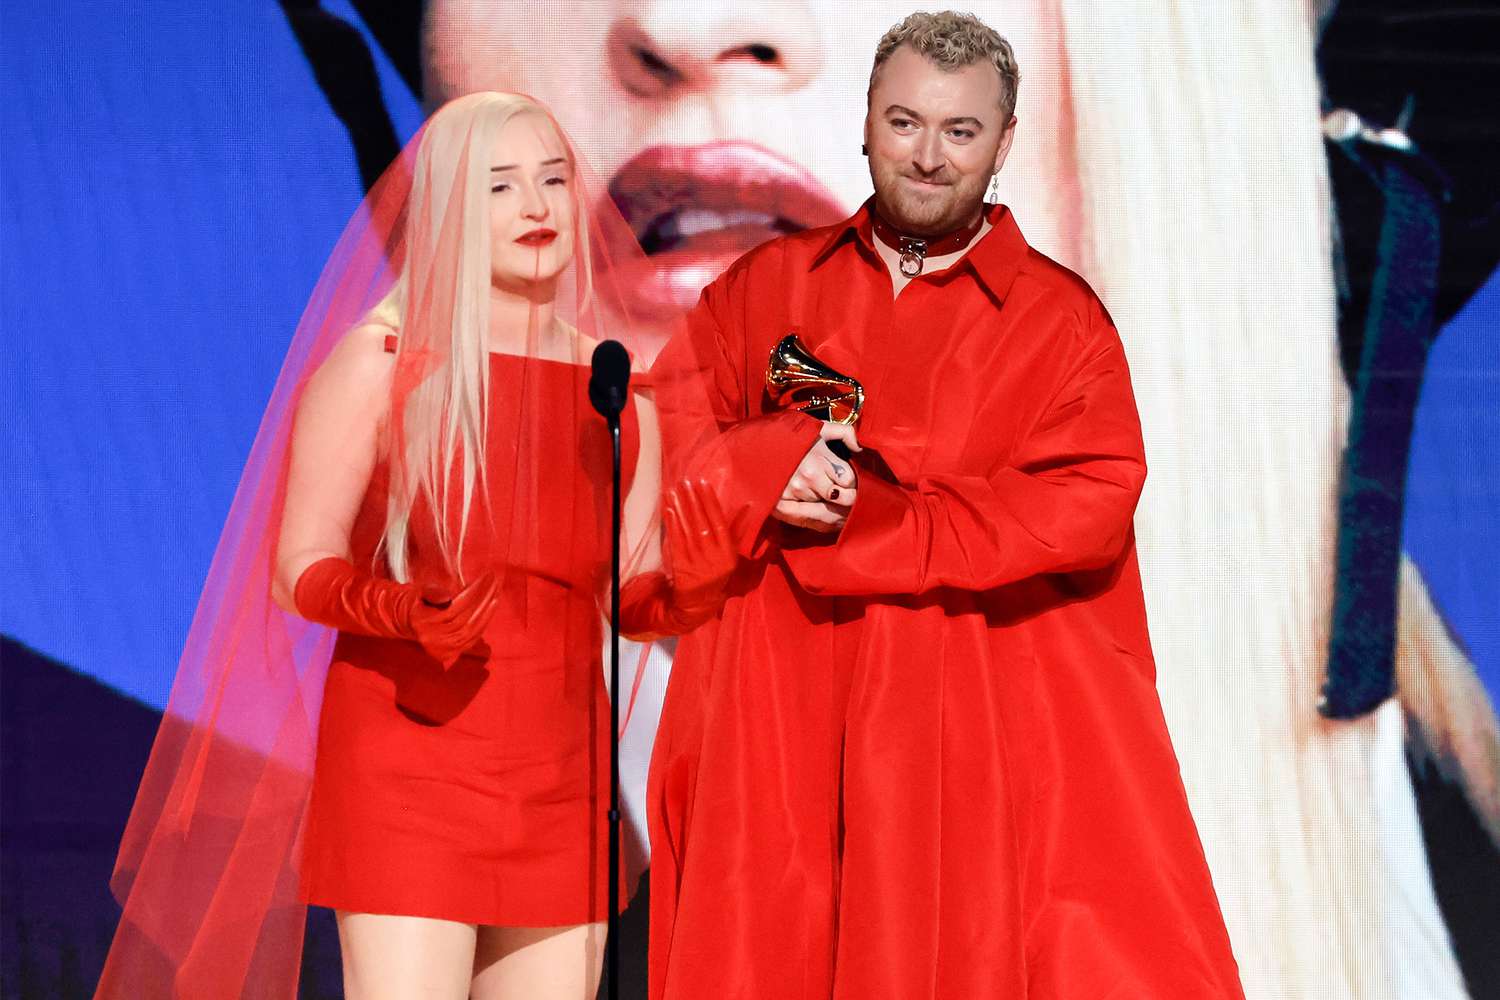 Kim Petras and Sam Smith accept the Best Pop Duo/Group Performance award for “Unholy” onstage during the 65th GRAMMY Awards at Crypto.com Arena on February 05, 2023 in Los Angeles, California